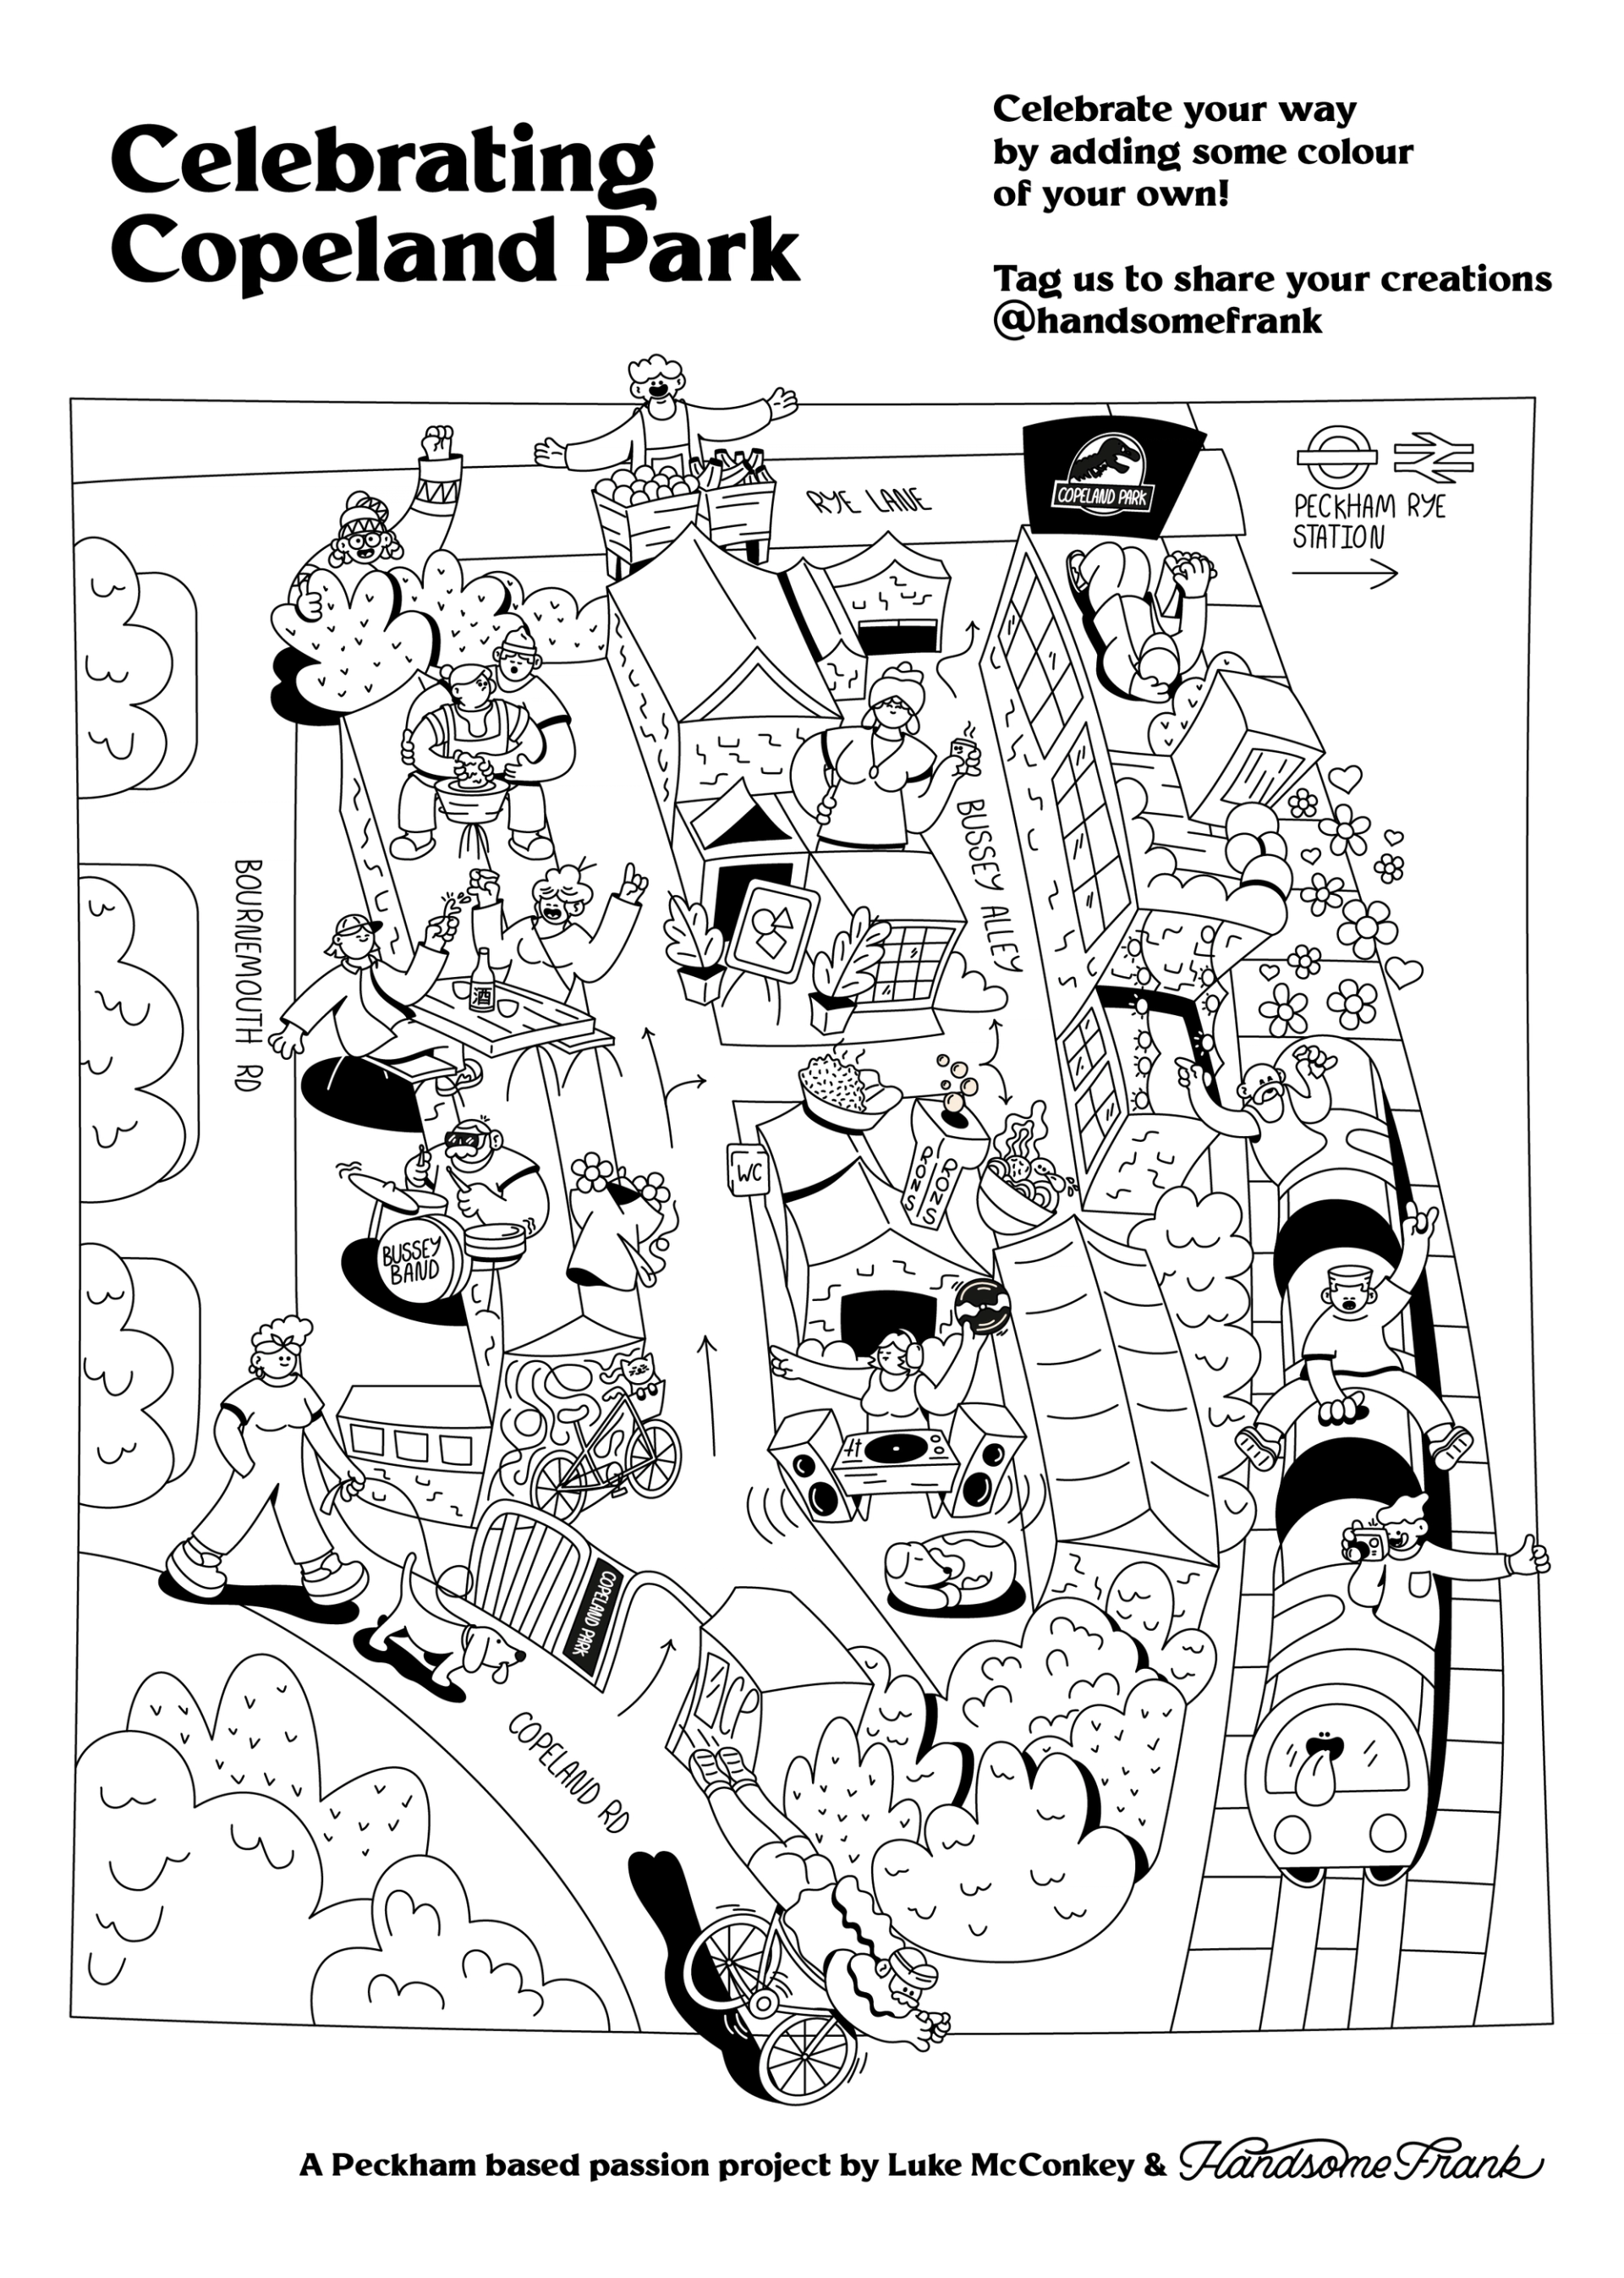 Black and white line drawing of Copeland Park and characters for colouring in, by Luke McConkey